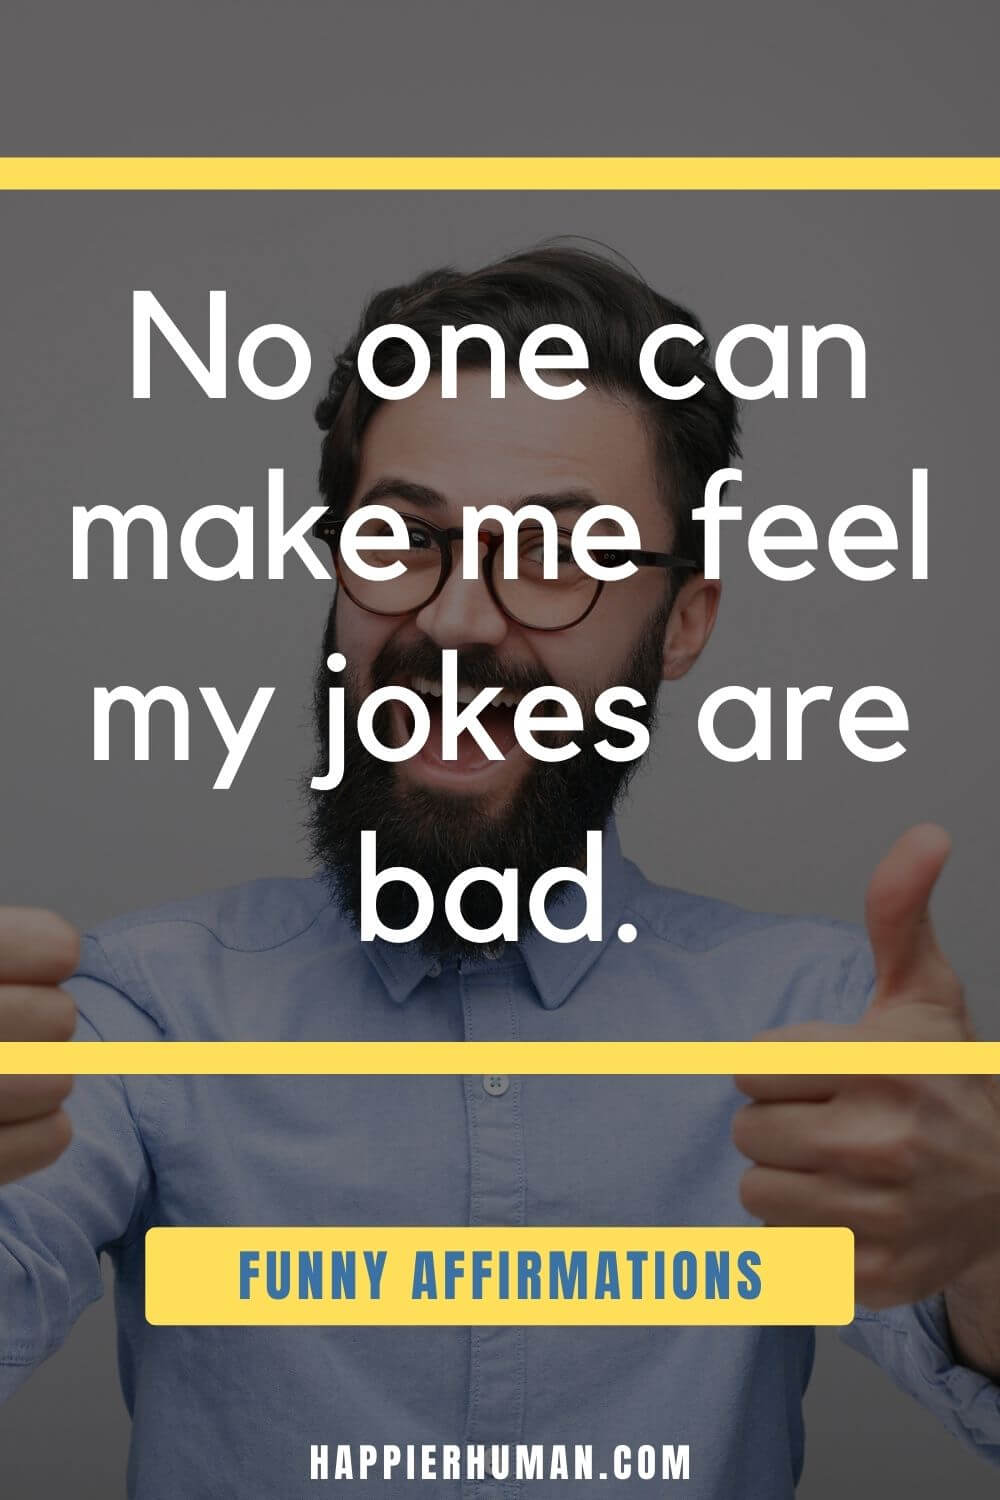 Funny Affirmations - No one can make me feel my jokes are bad. | funny affirmations for work | funny short affirmations | vulgar affirmations